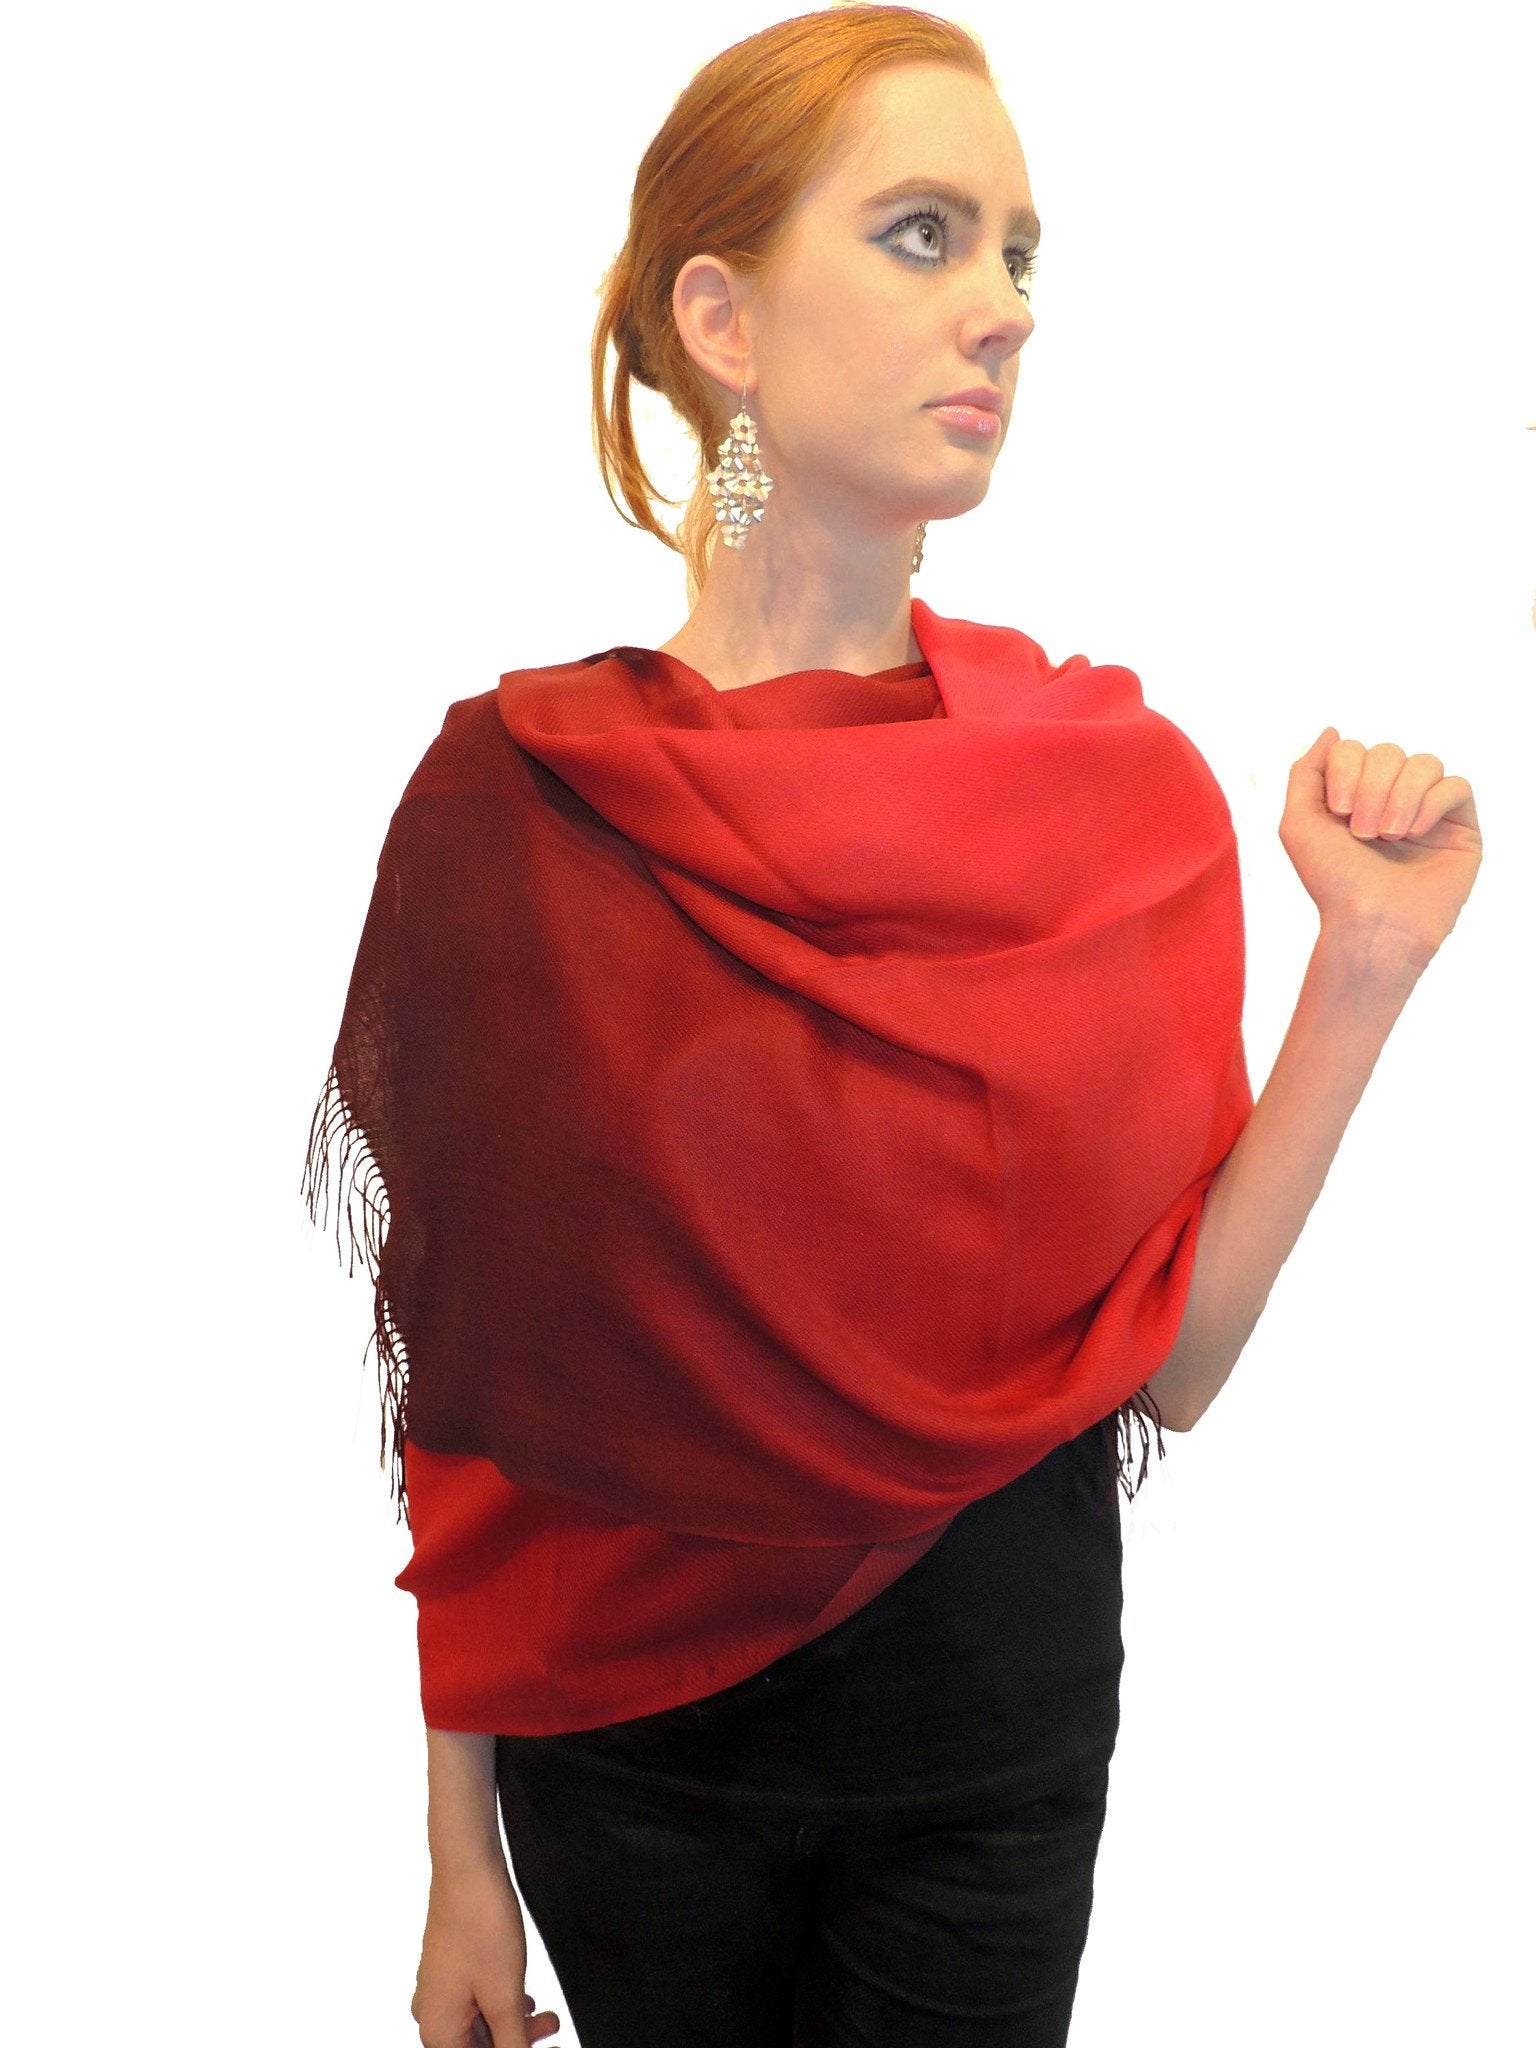 Baby Alpaca & Silk Shawl Two-toned Degrade - Dip Dyed in Red - Qinti - The Peruvian Shop